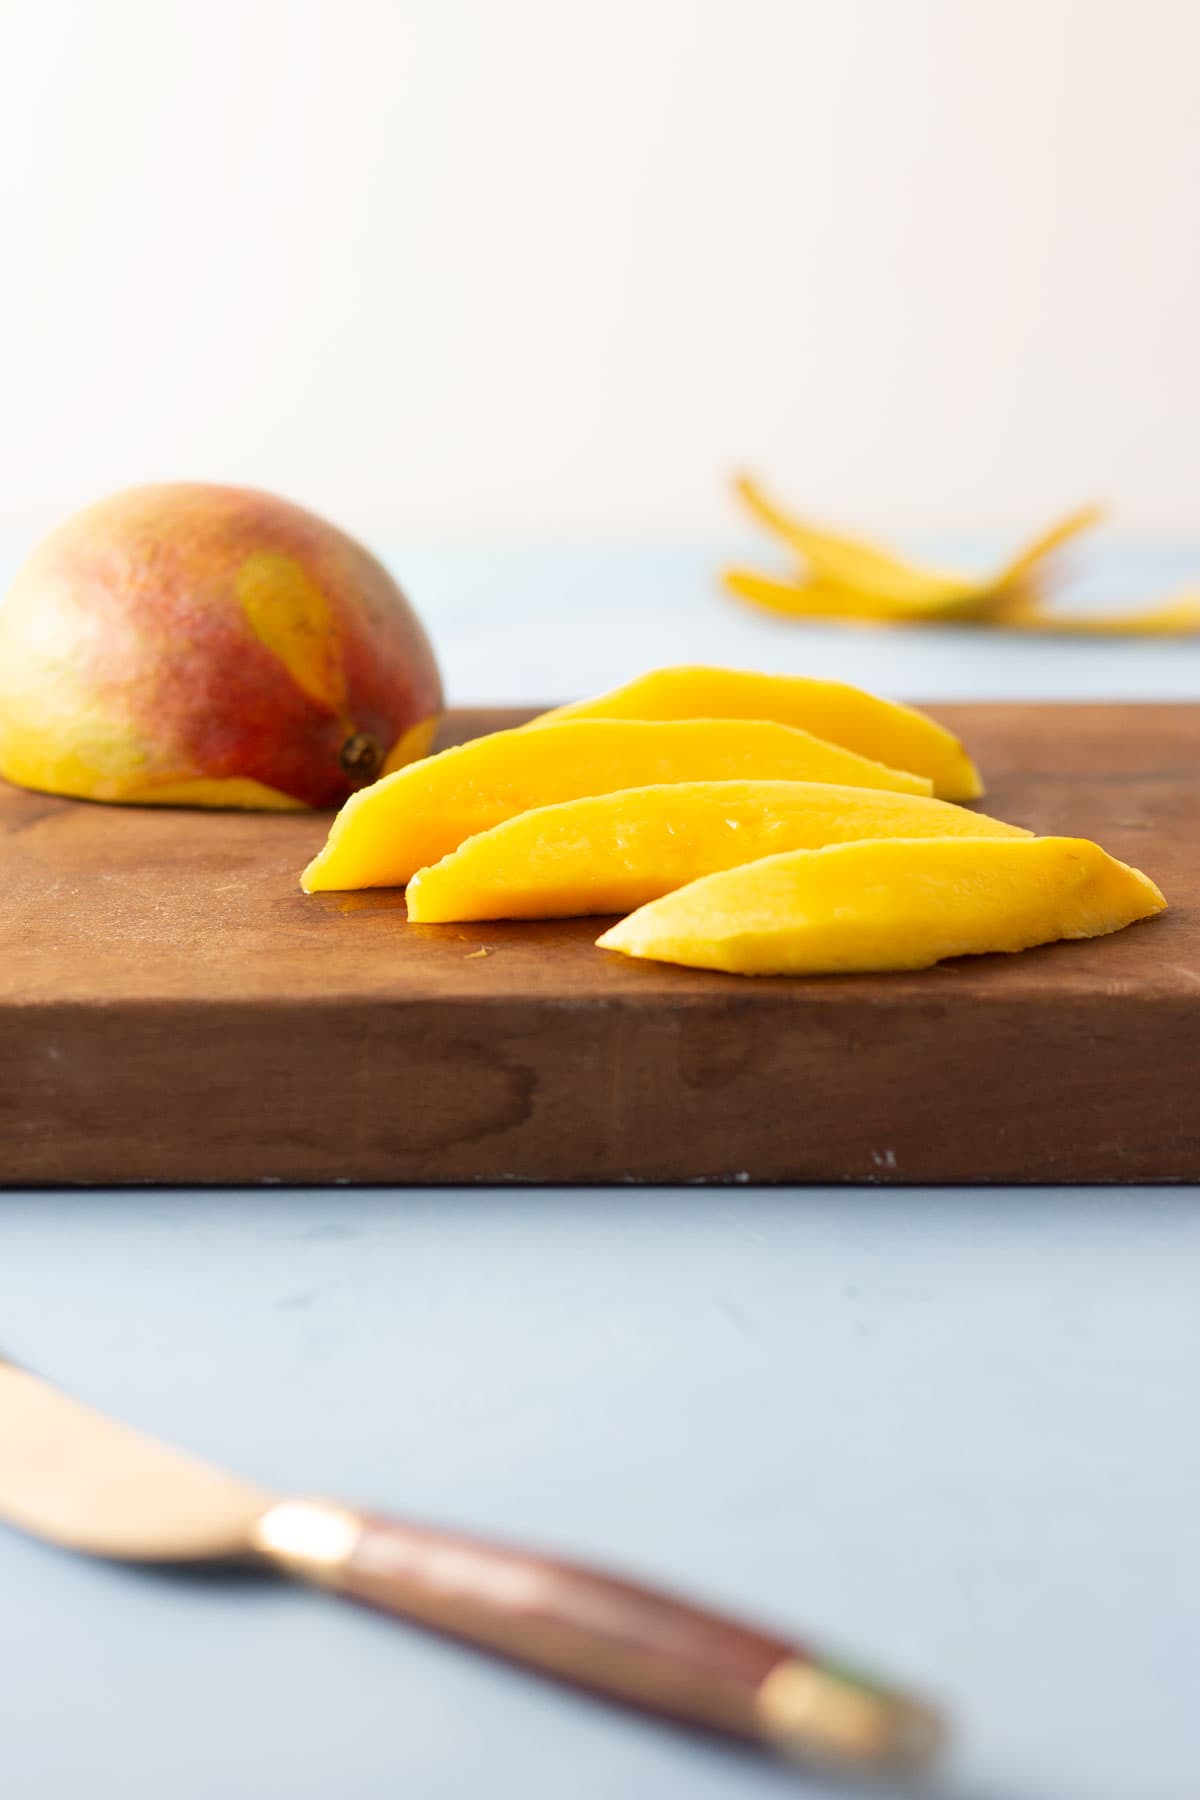 Fresh mango slices and half a mango on a cutting board with a knife in the forefront.